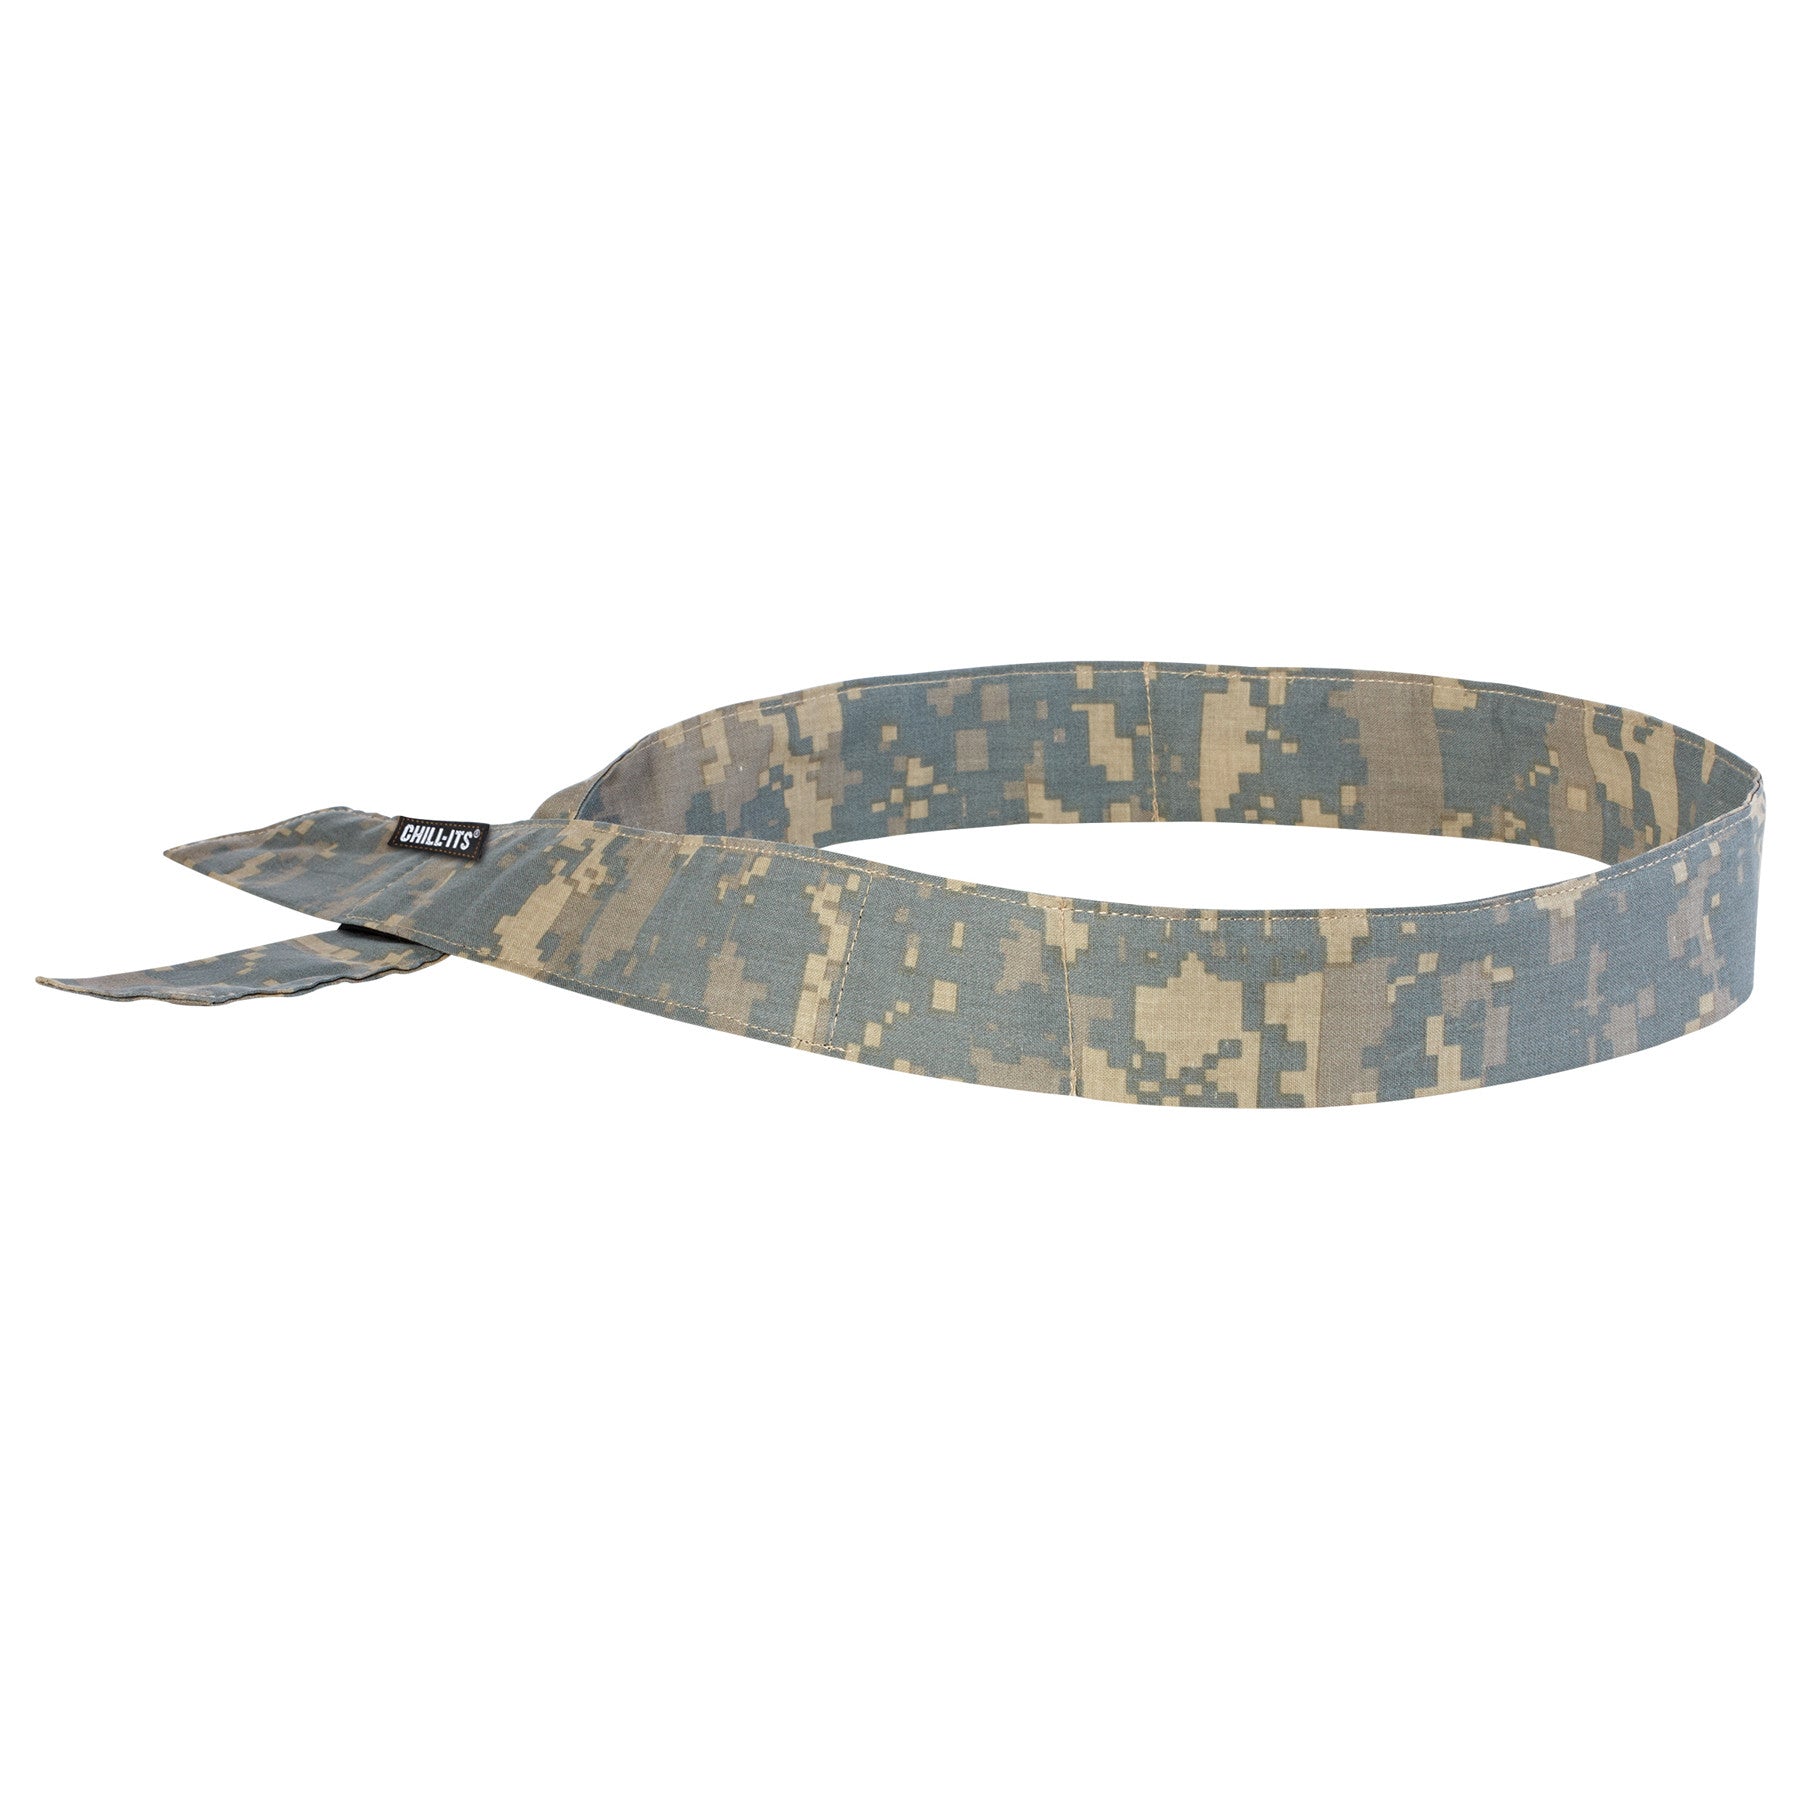 Ergodyne Brown Camouflage Chill-Its 6705 Lightweight Cotton Evaporative Cooling Bandana/Headband With Hook And Loop Closure-eSafety Supplies, Inc